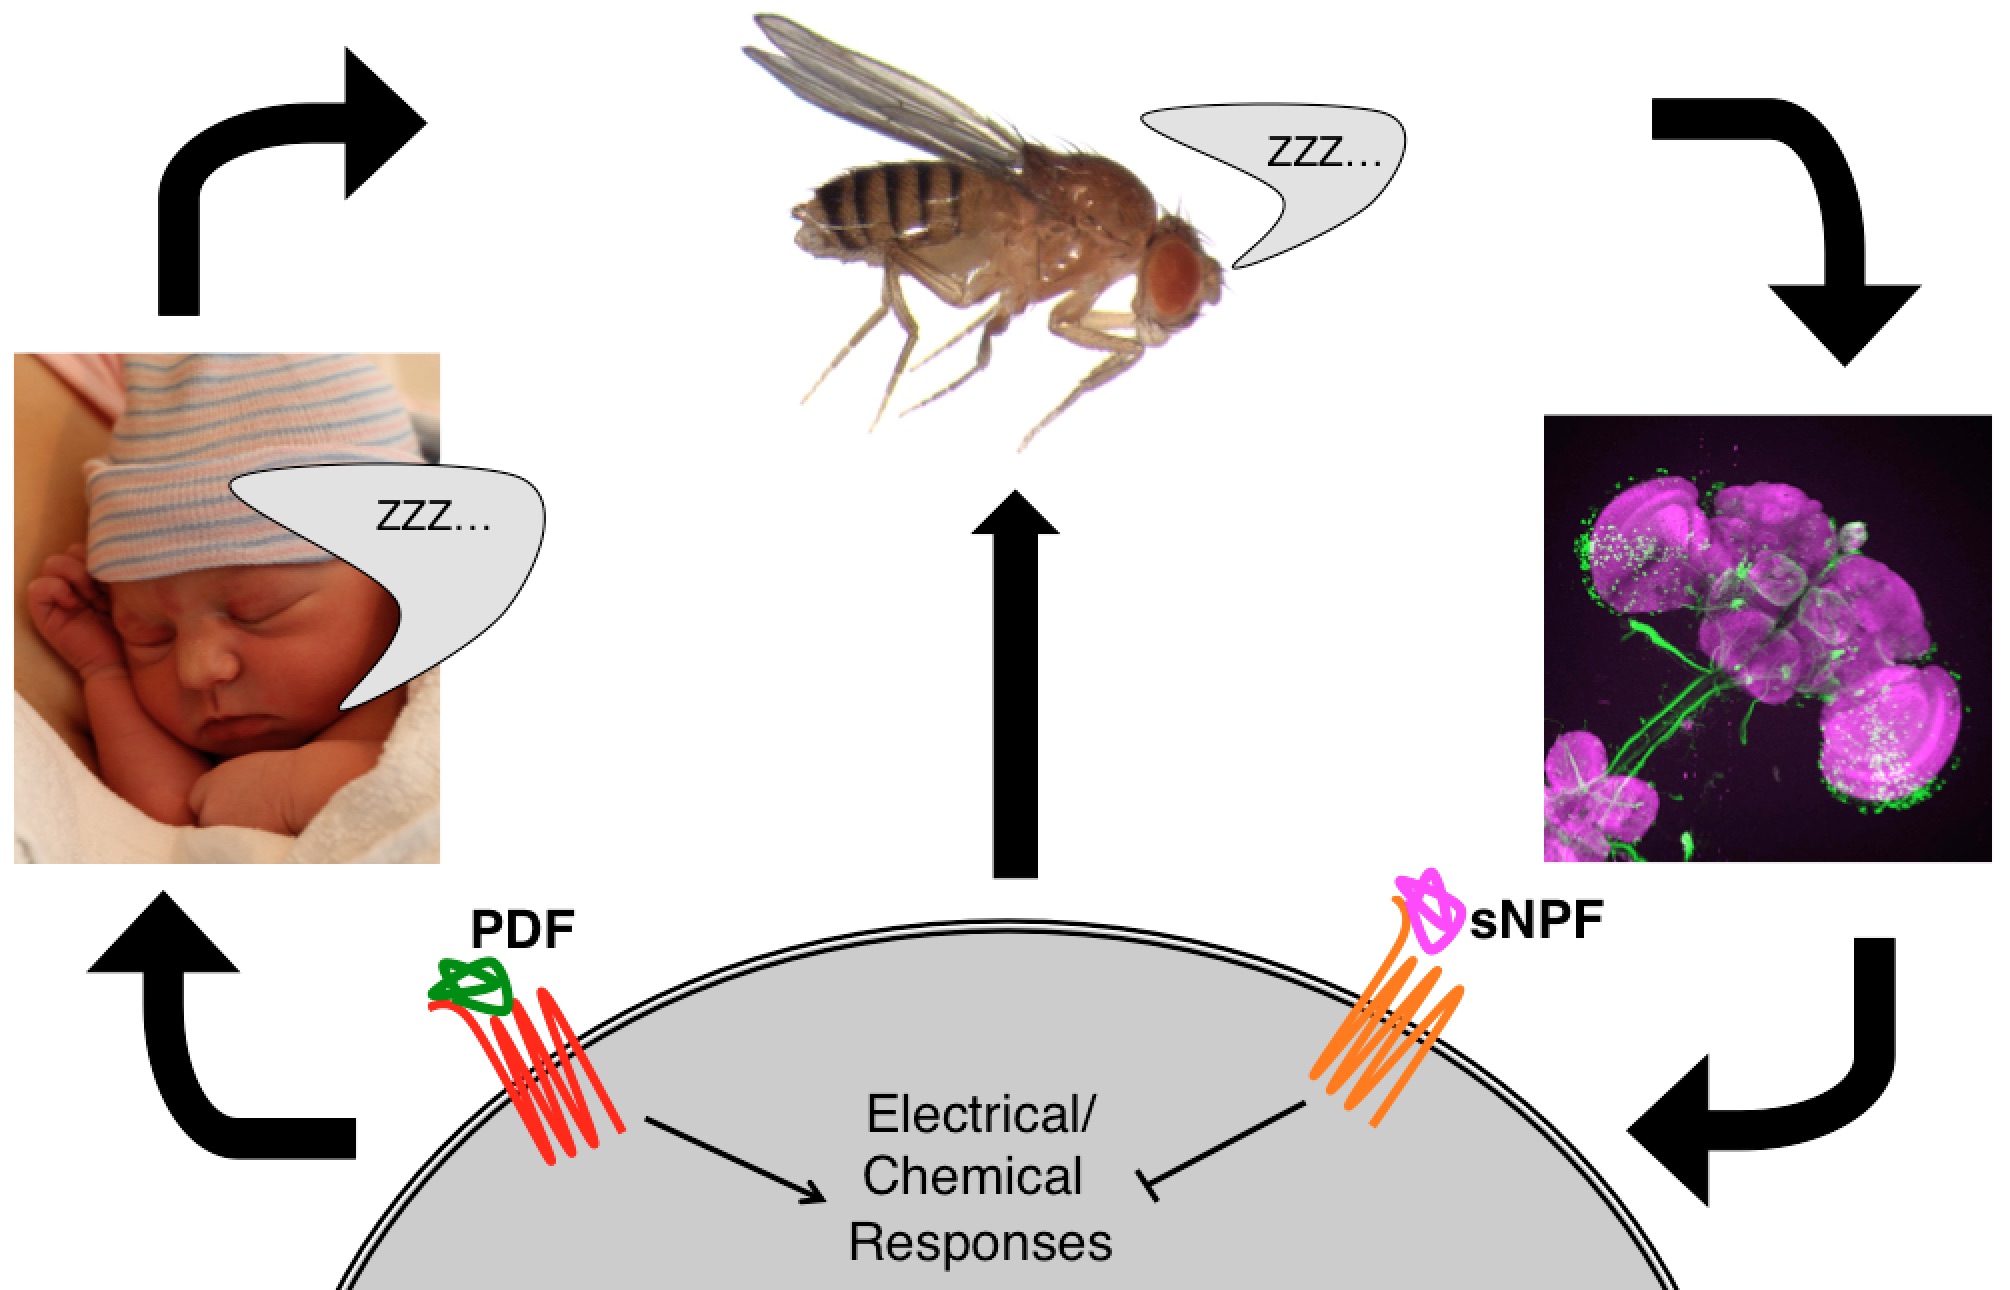 Sleeping on the Fly: Studying Fruit Flies to Learn About Mechanisms of Sleep Regulation